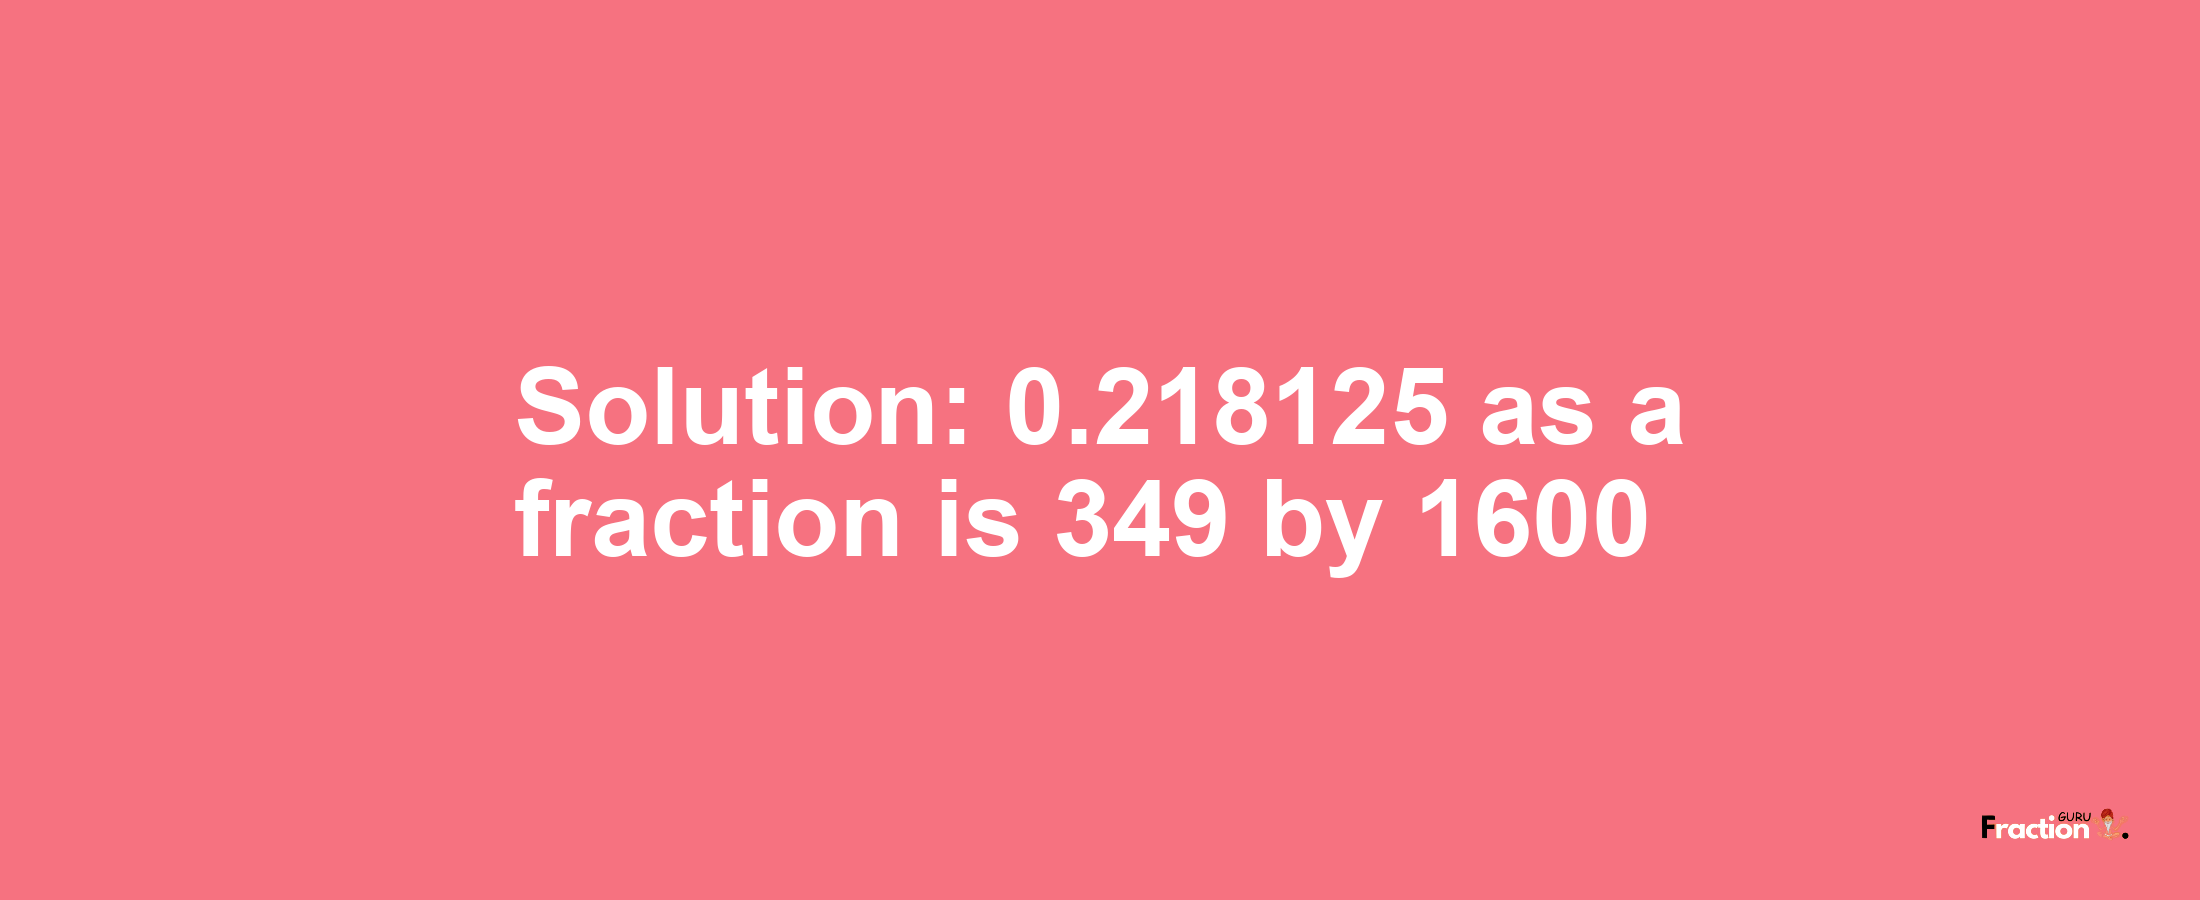 Solution:0.218125 as a fraction is 349/1600